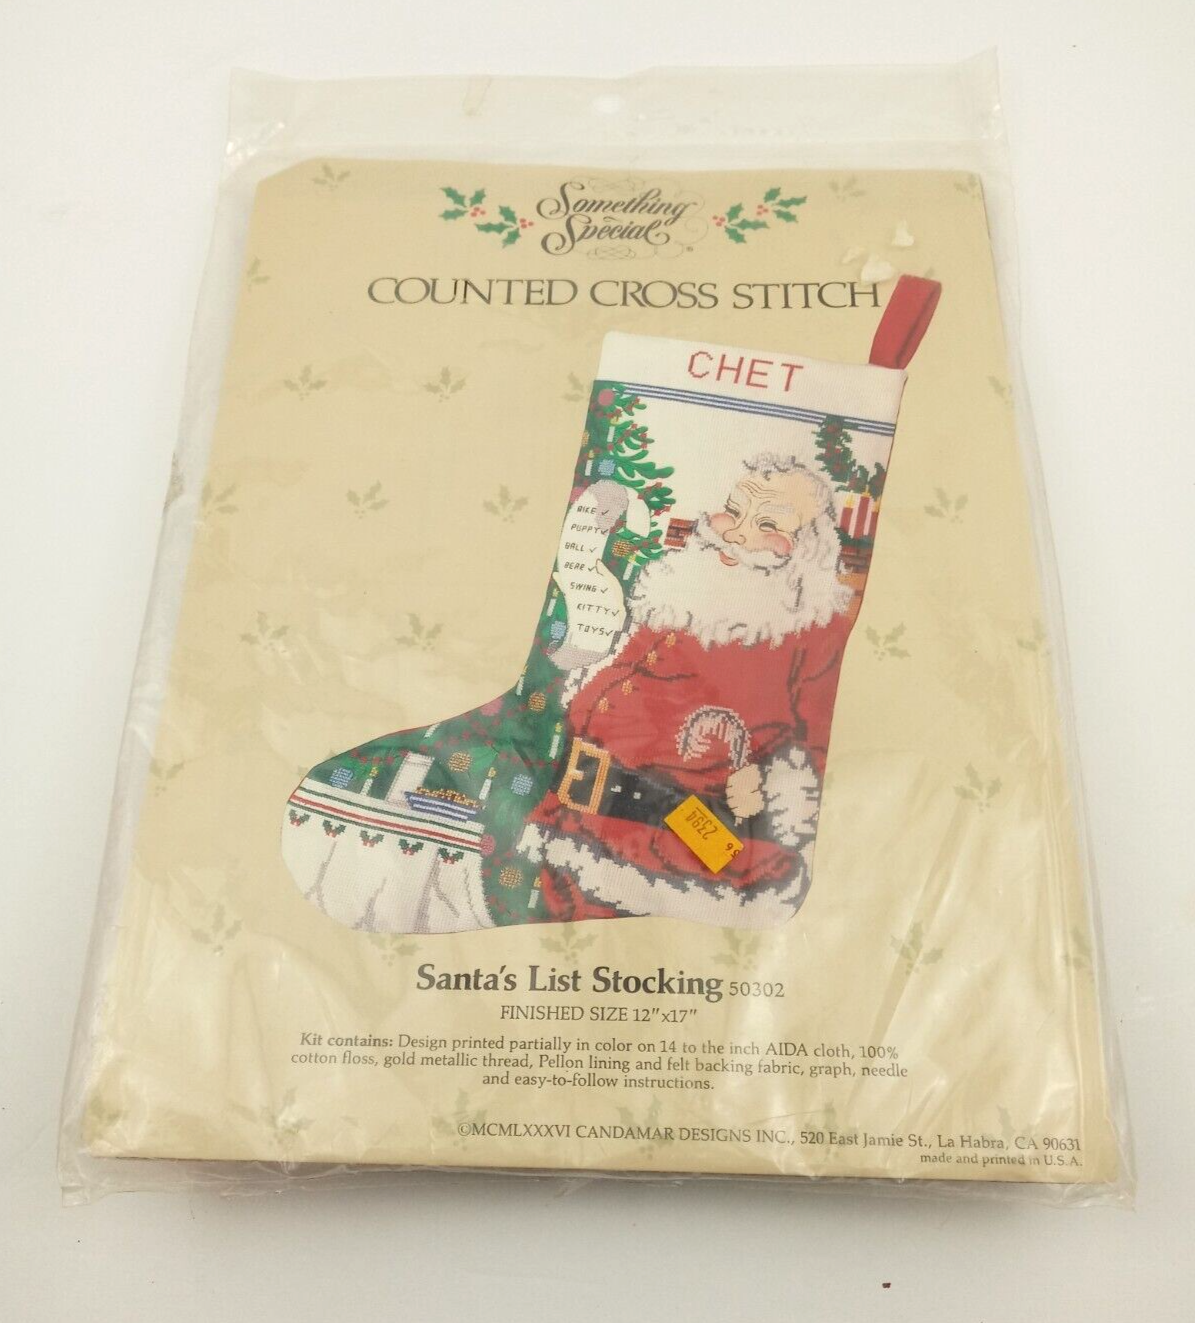 1986 Something Special Counted Cross Stitch Santas List Stocking 50302 - NOS - $48.99